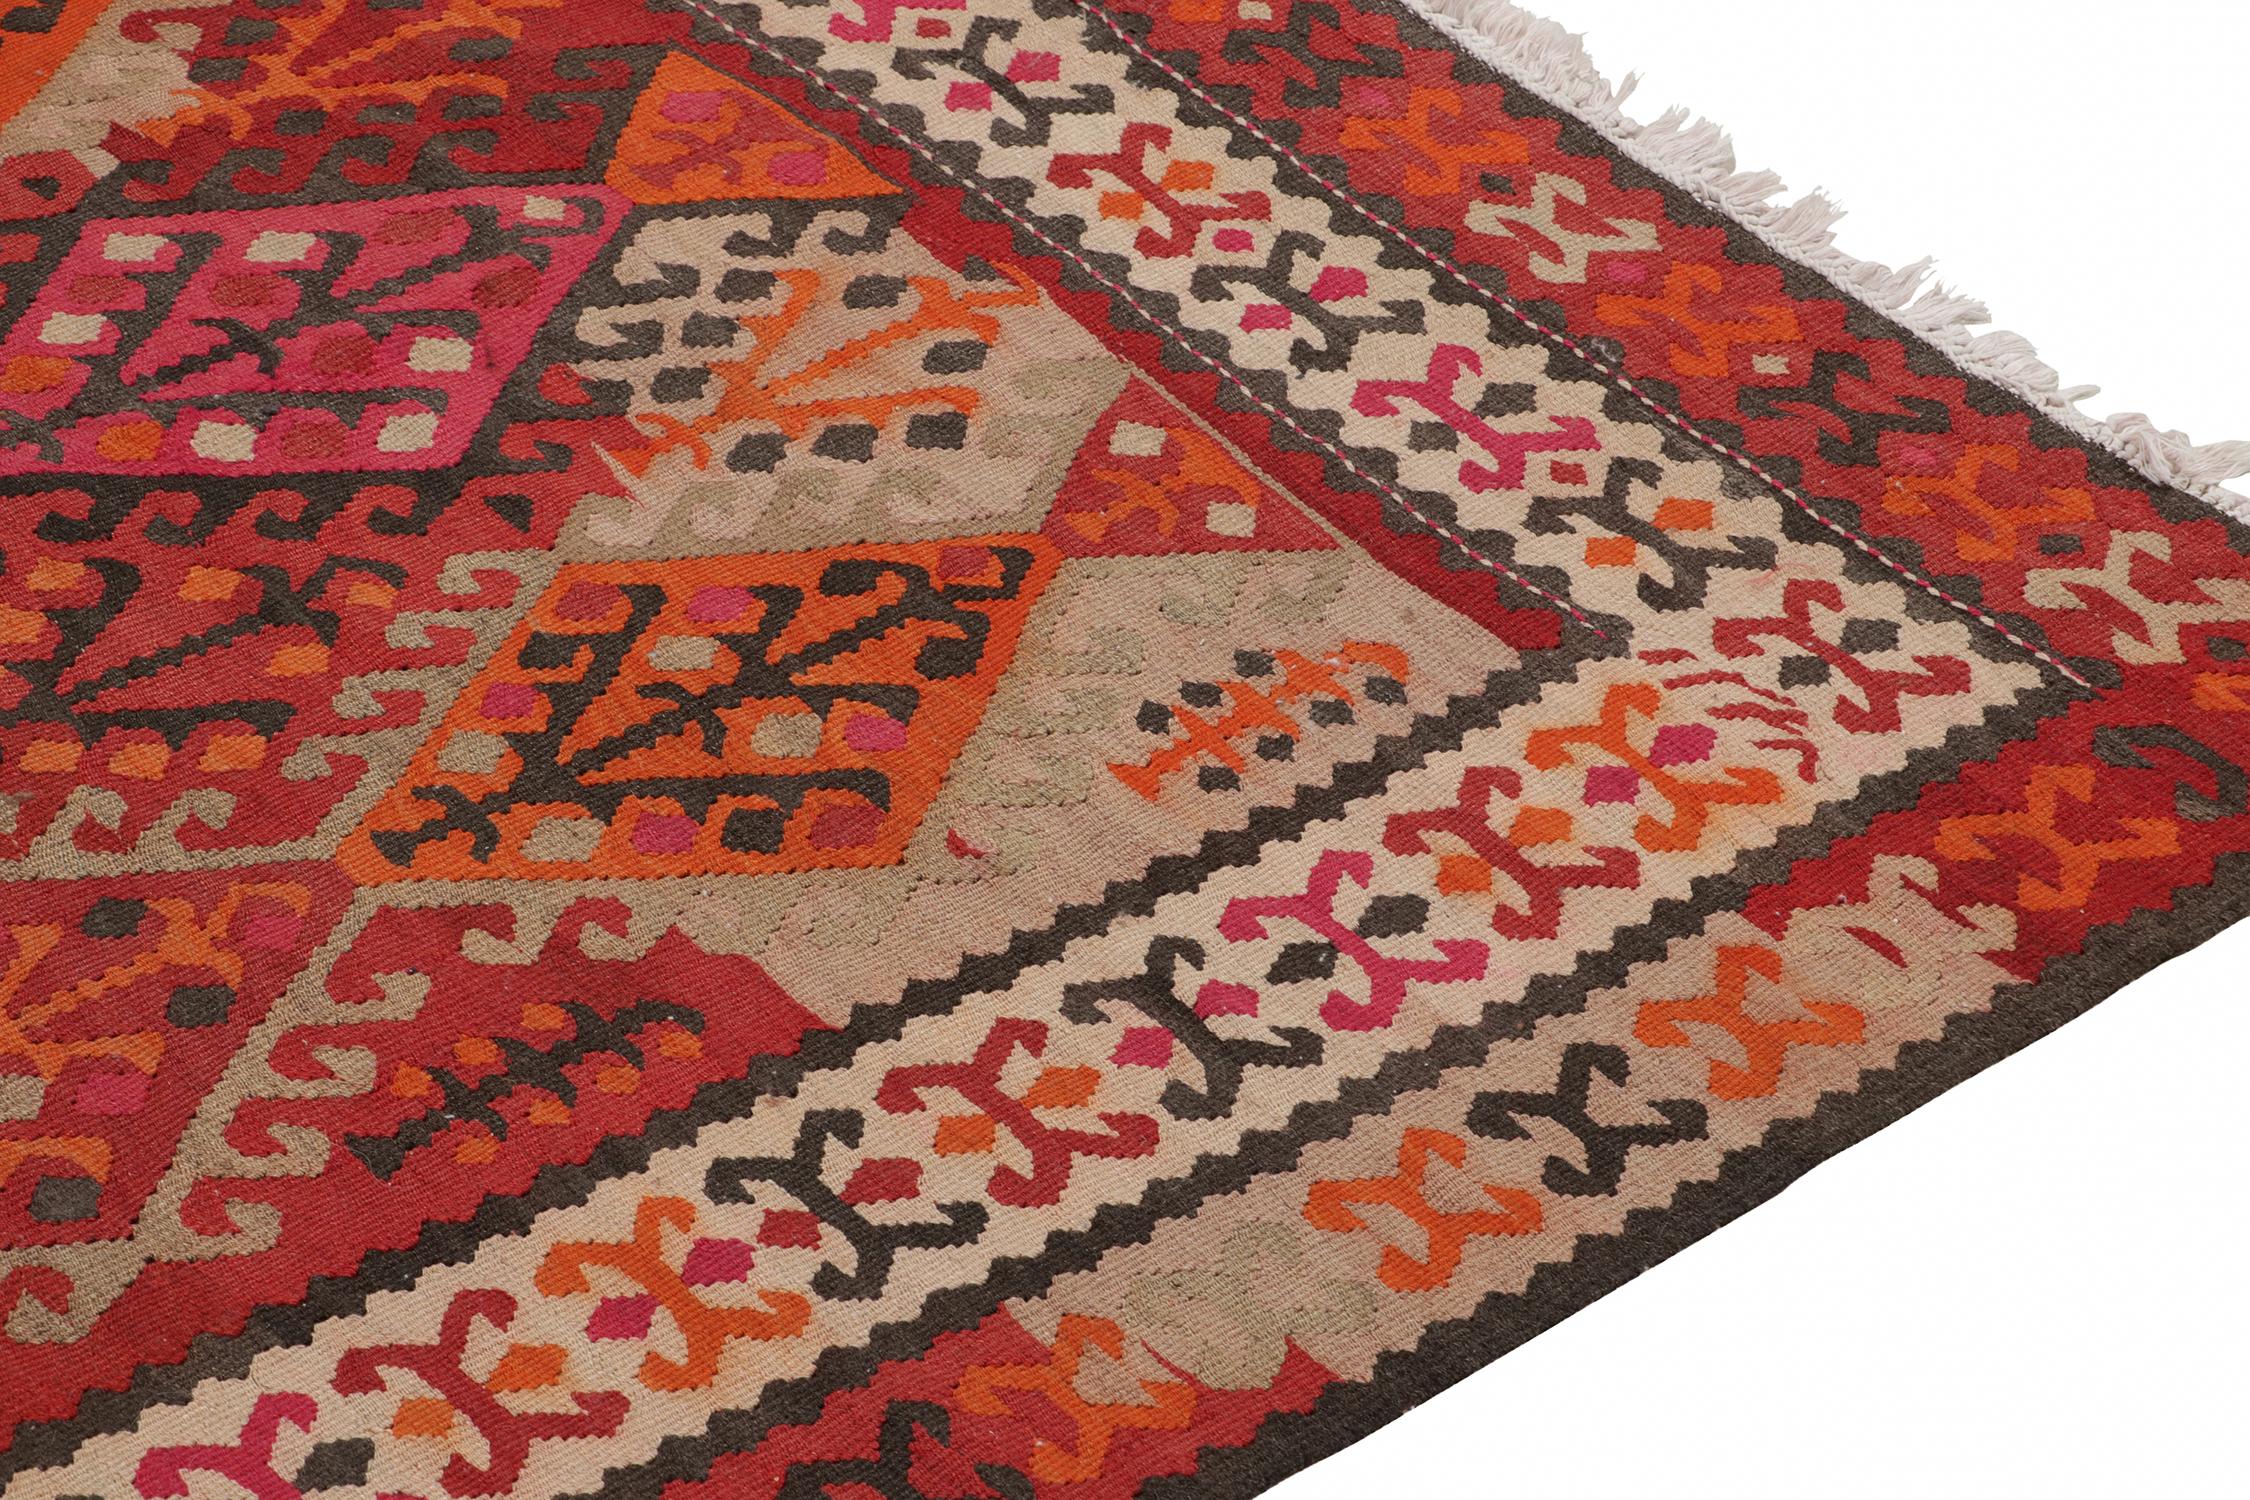 Vintage Tribal Kilim Rug in Red with Colorful Geometric Patterns by Rug & Kilim In Good Condition For Sale In Long Island City, NY